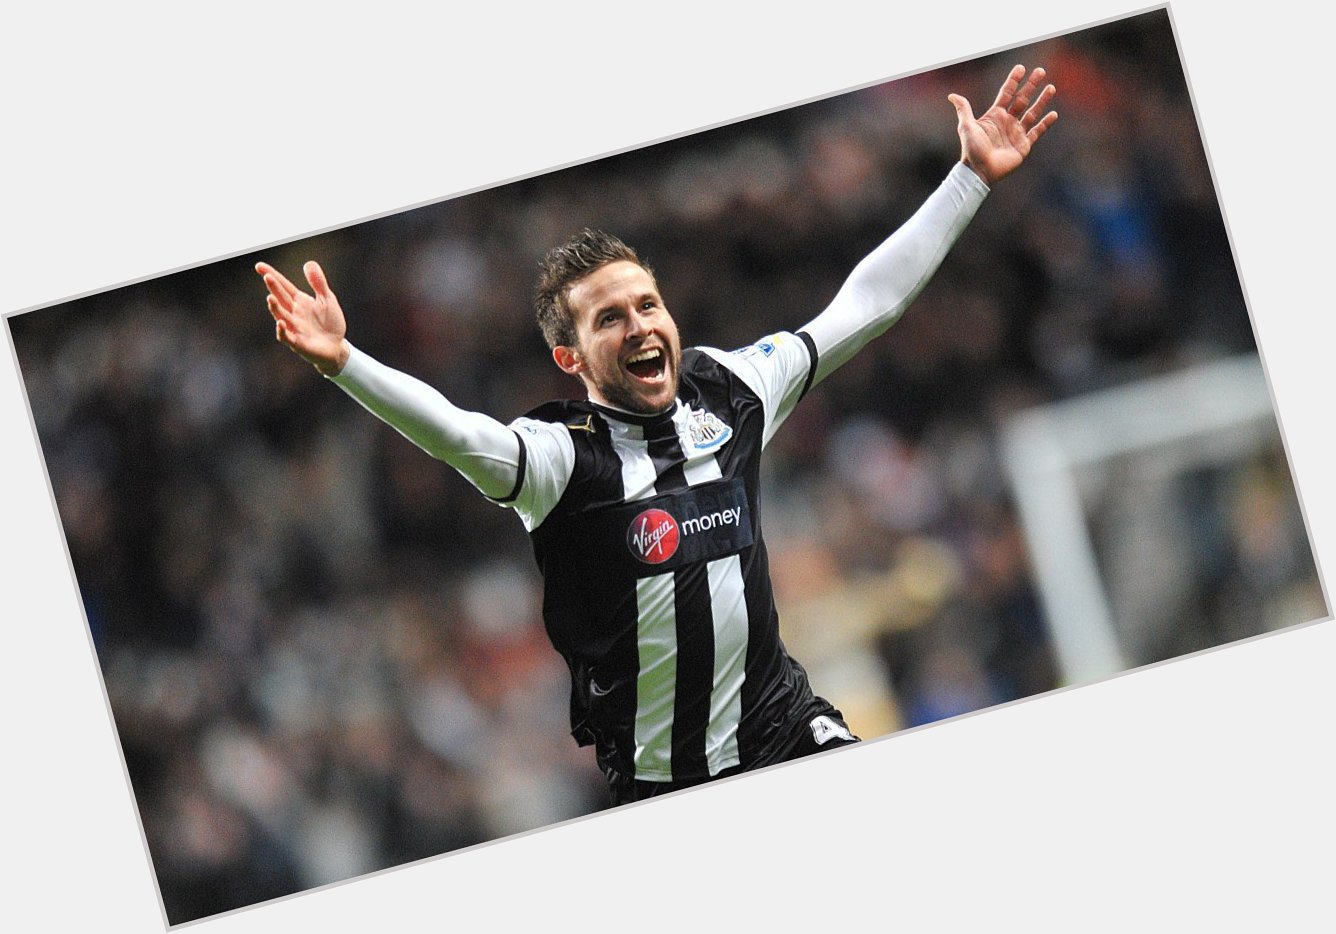   Yohan Cabaye stats

175 Games
26 Goals
15 Assists

Happy Birthday  